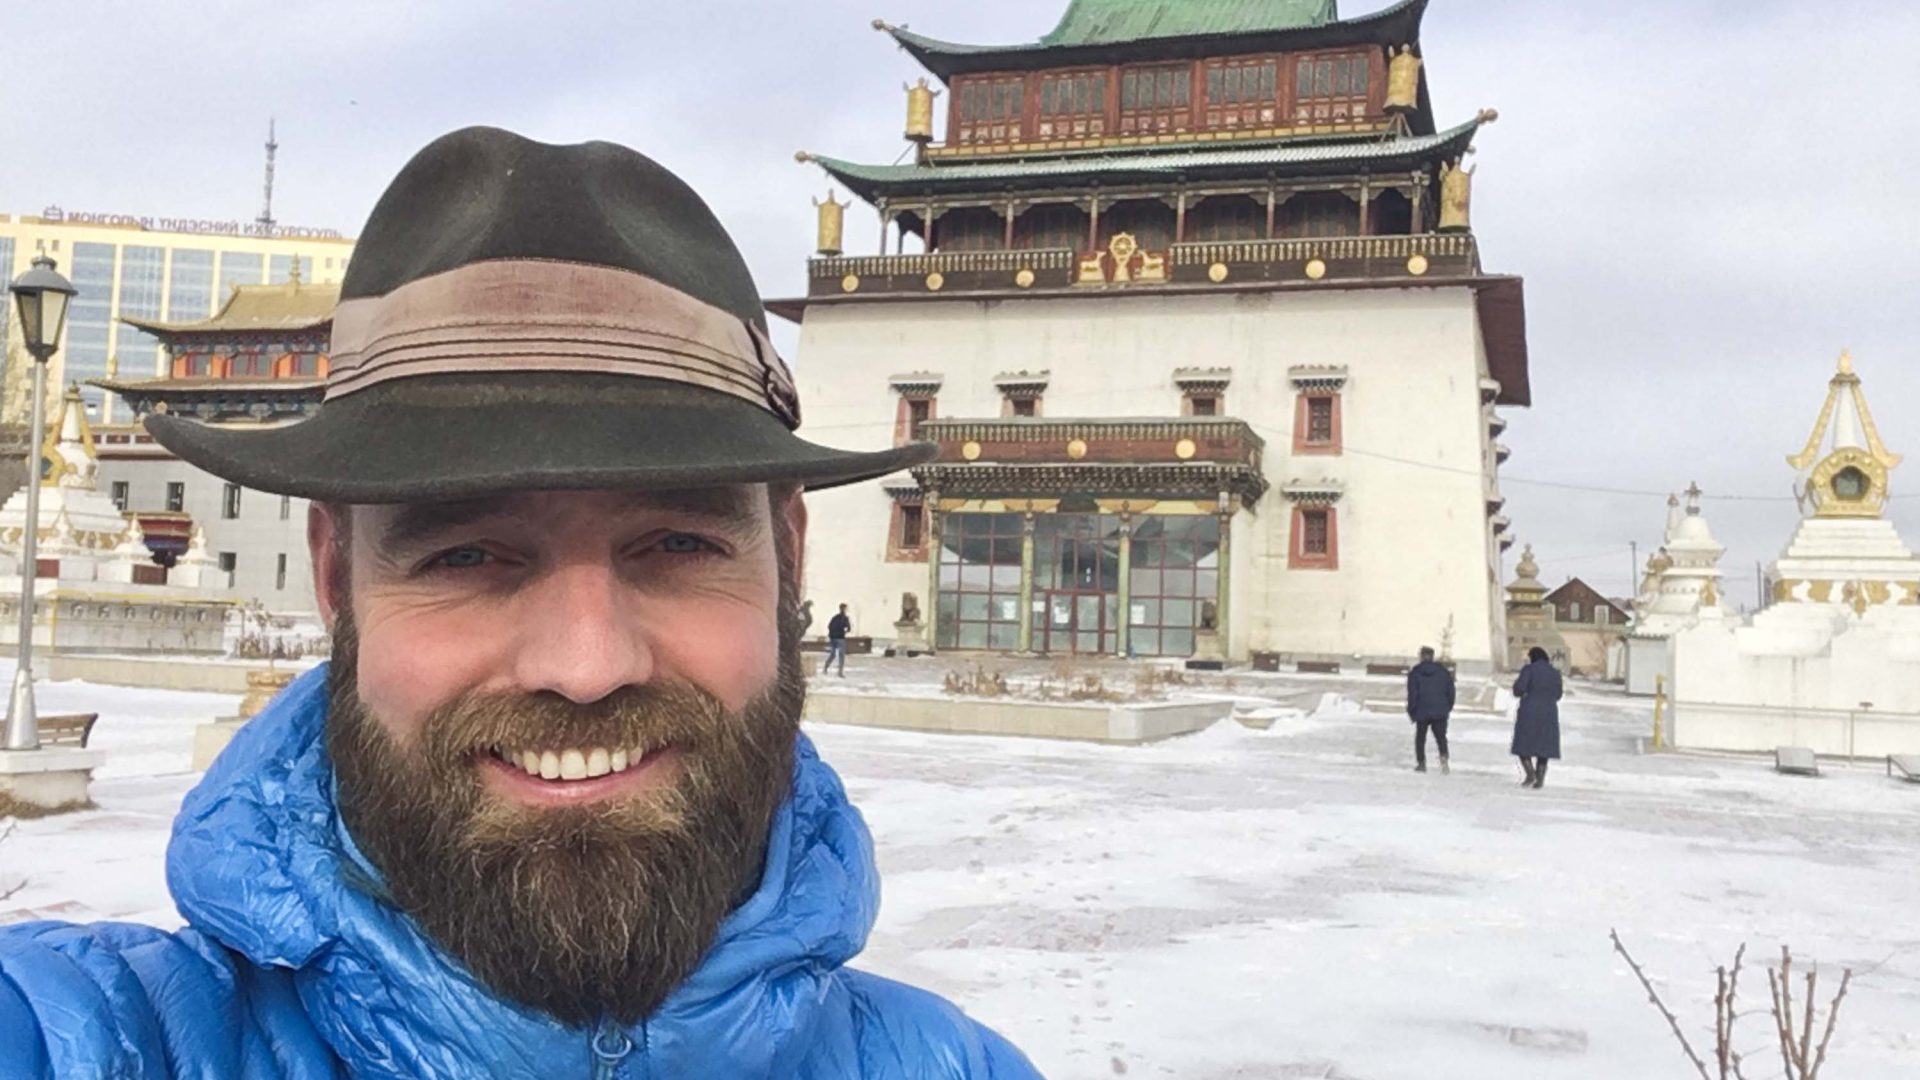 Thor in front of a temple with white walls and green roof in Mongolia.